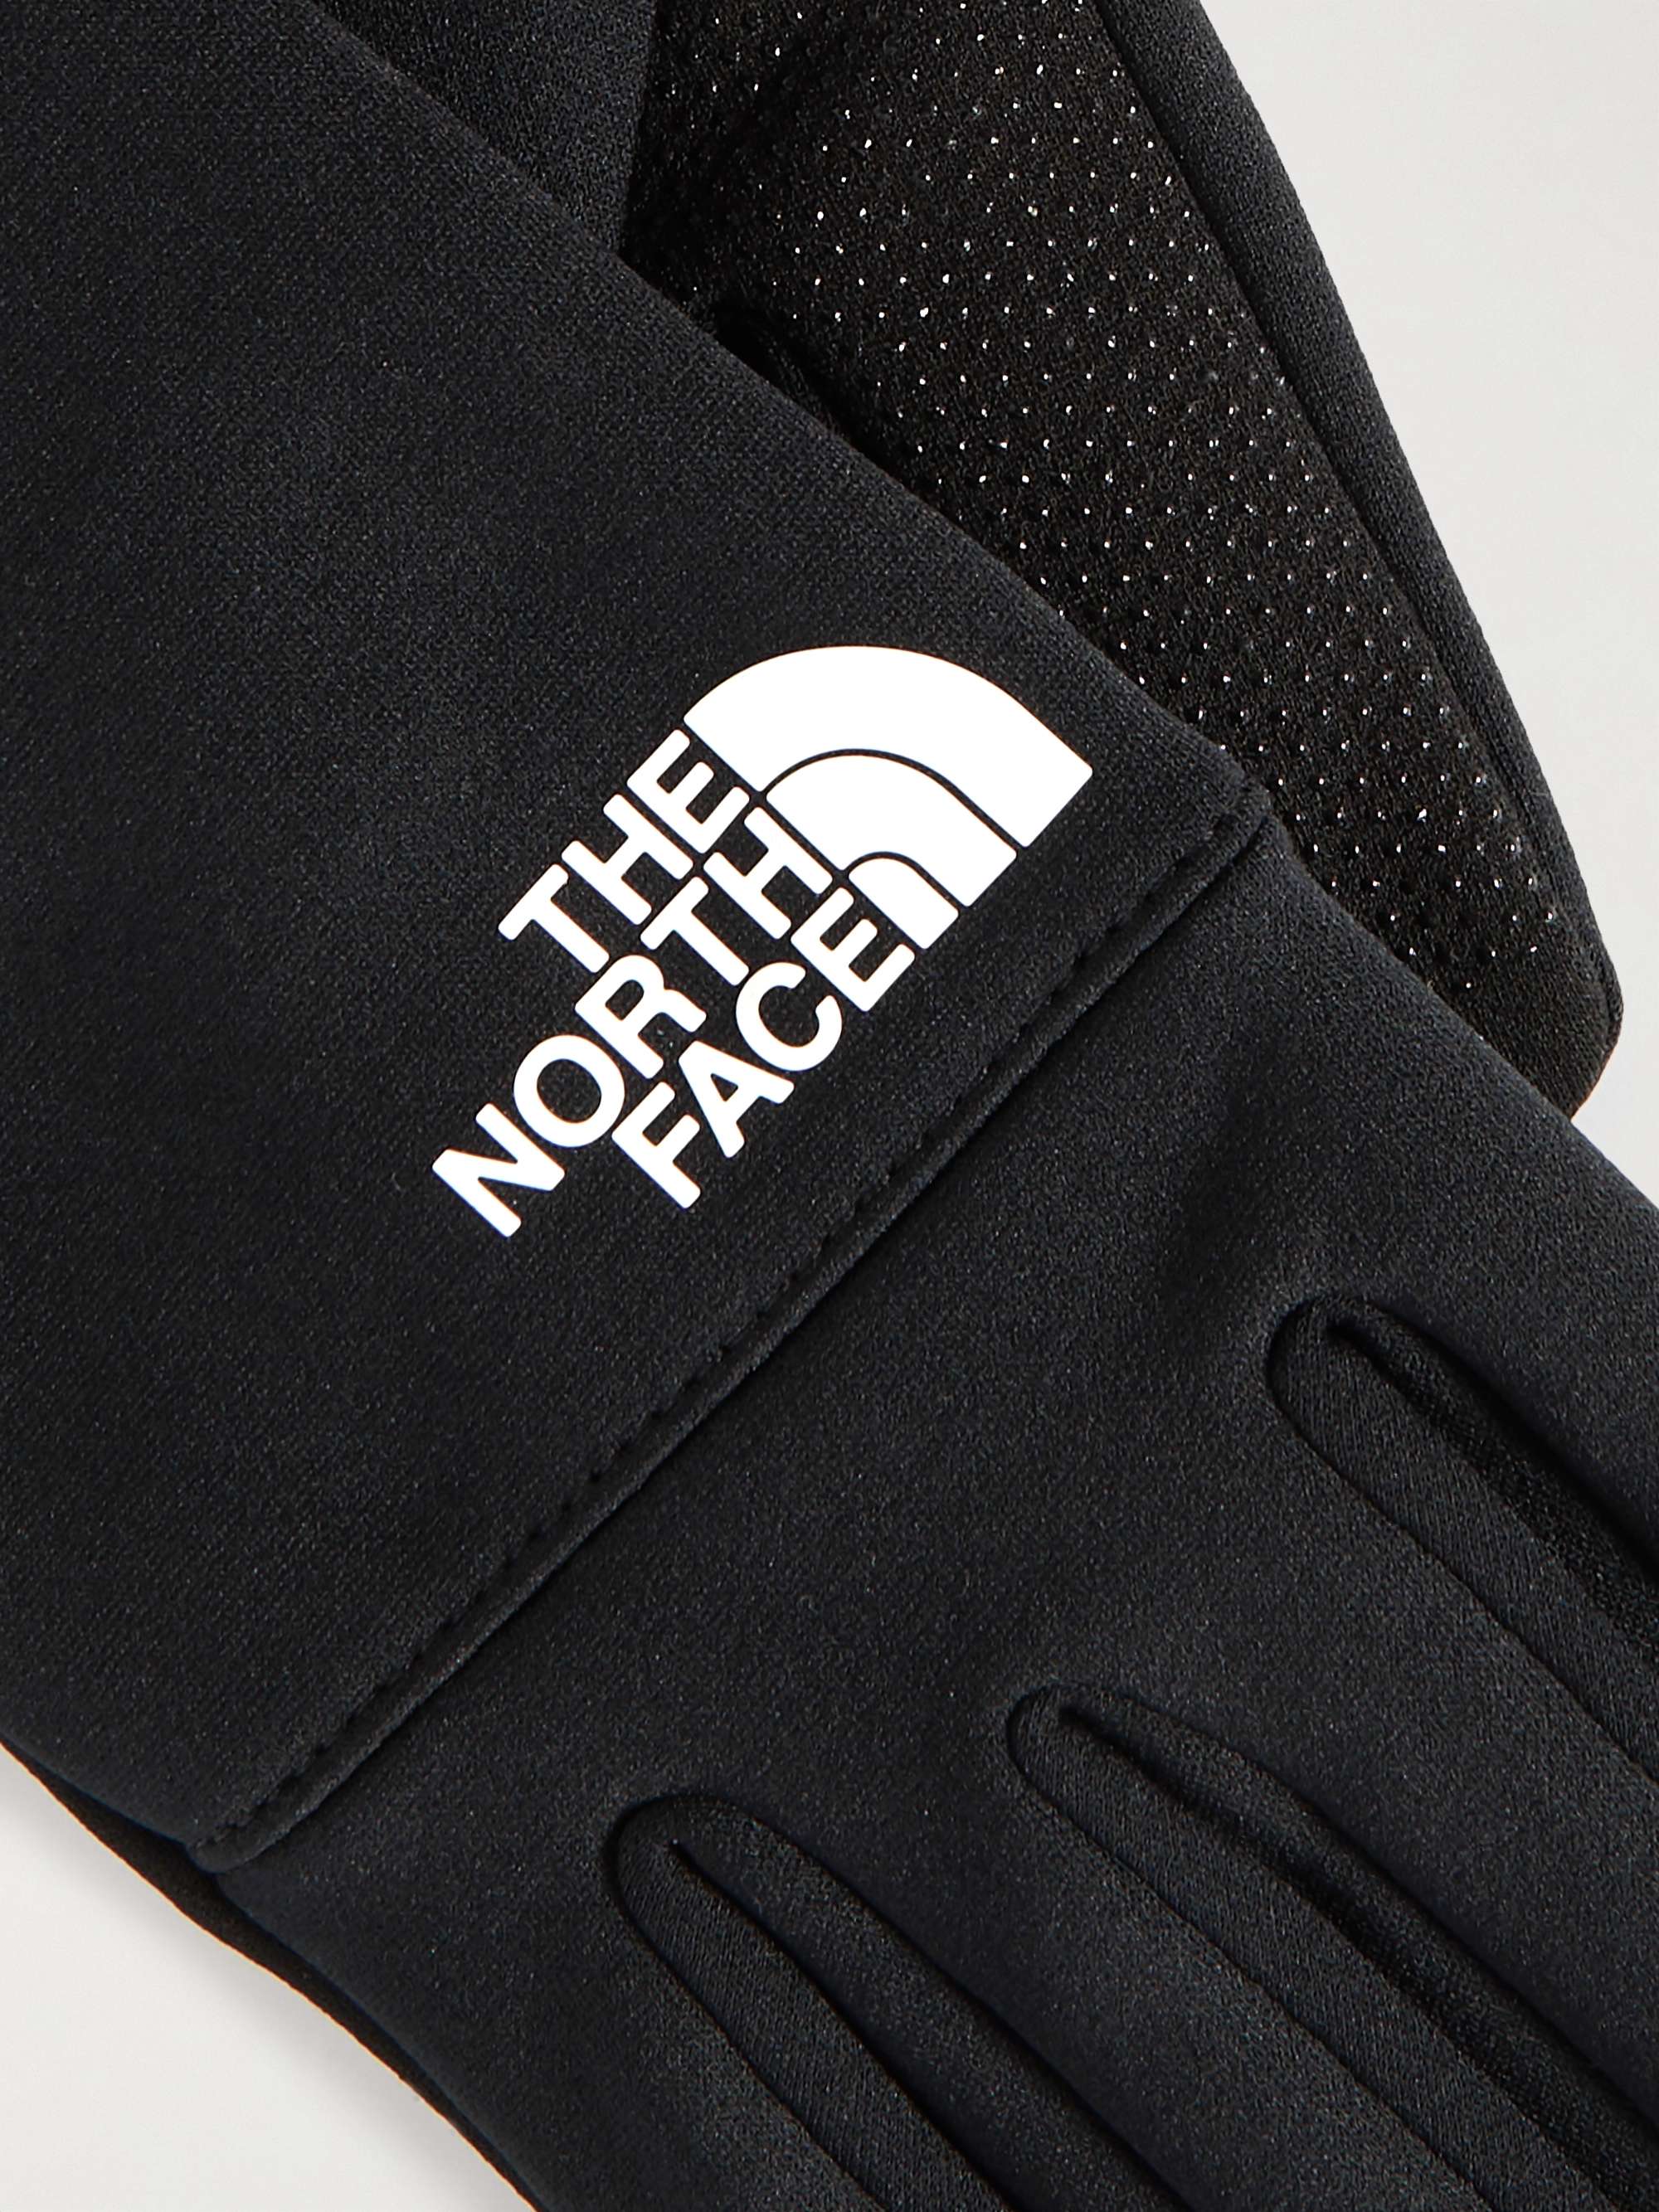 THE NORTH FACE Etip Logo-Print Recycled Stretch-Jersey Gloves